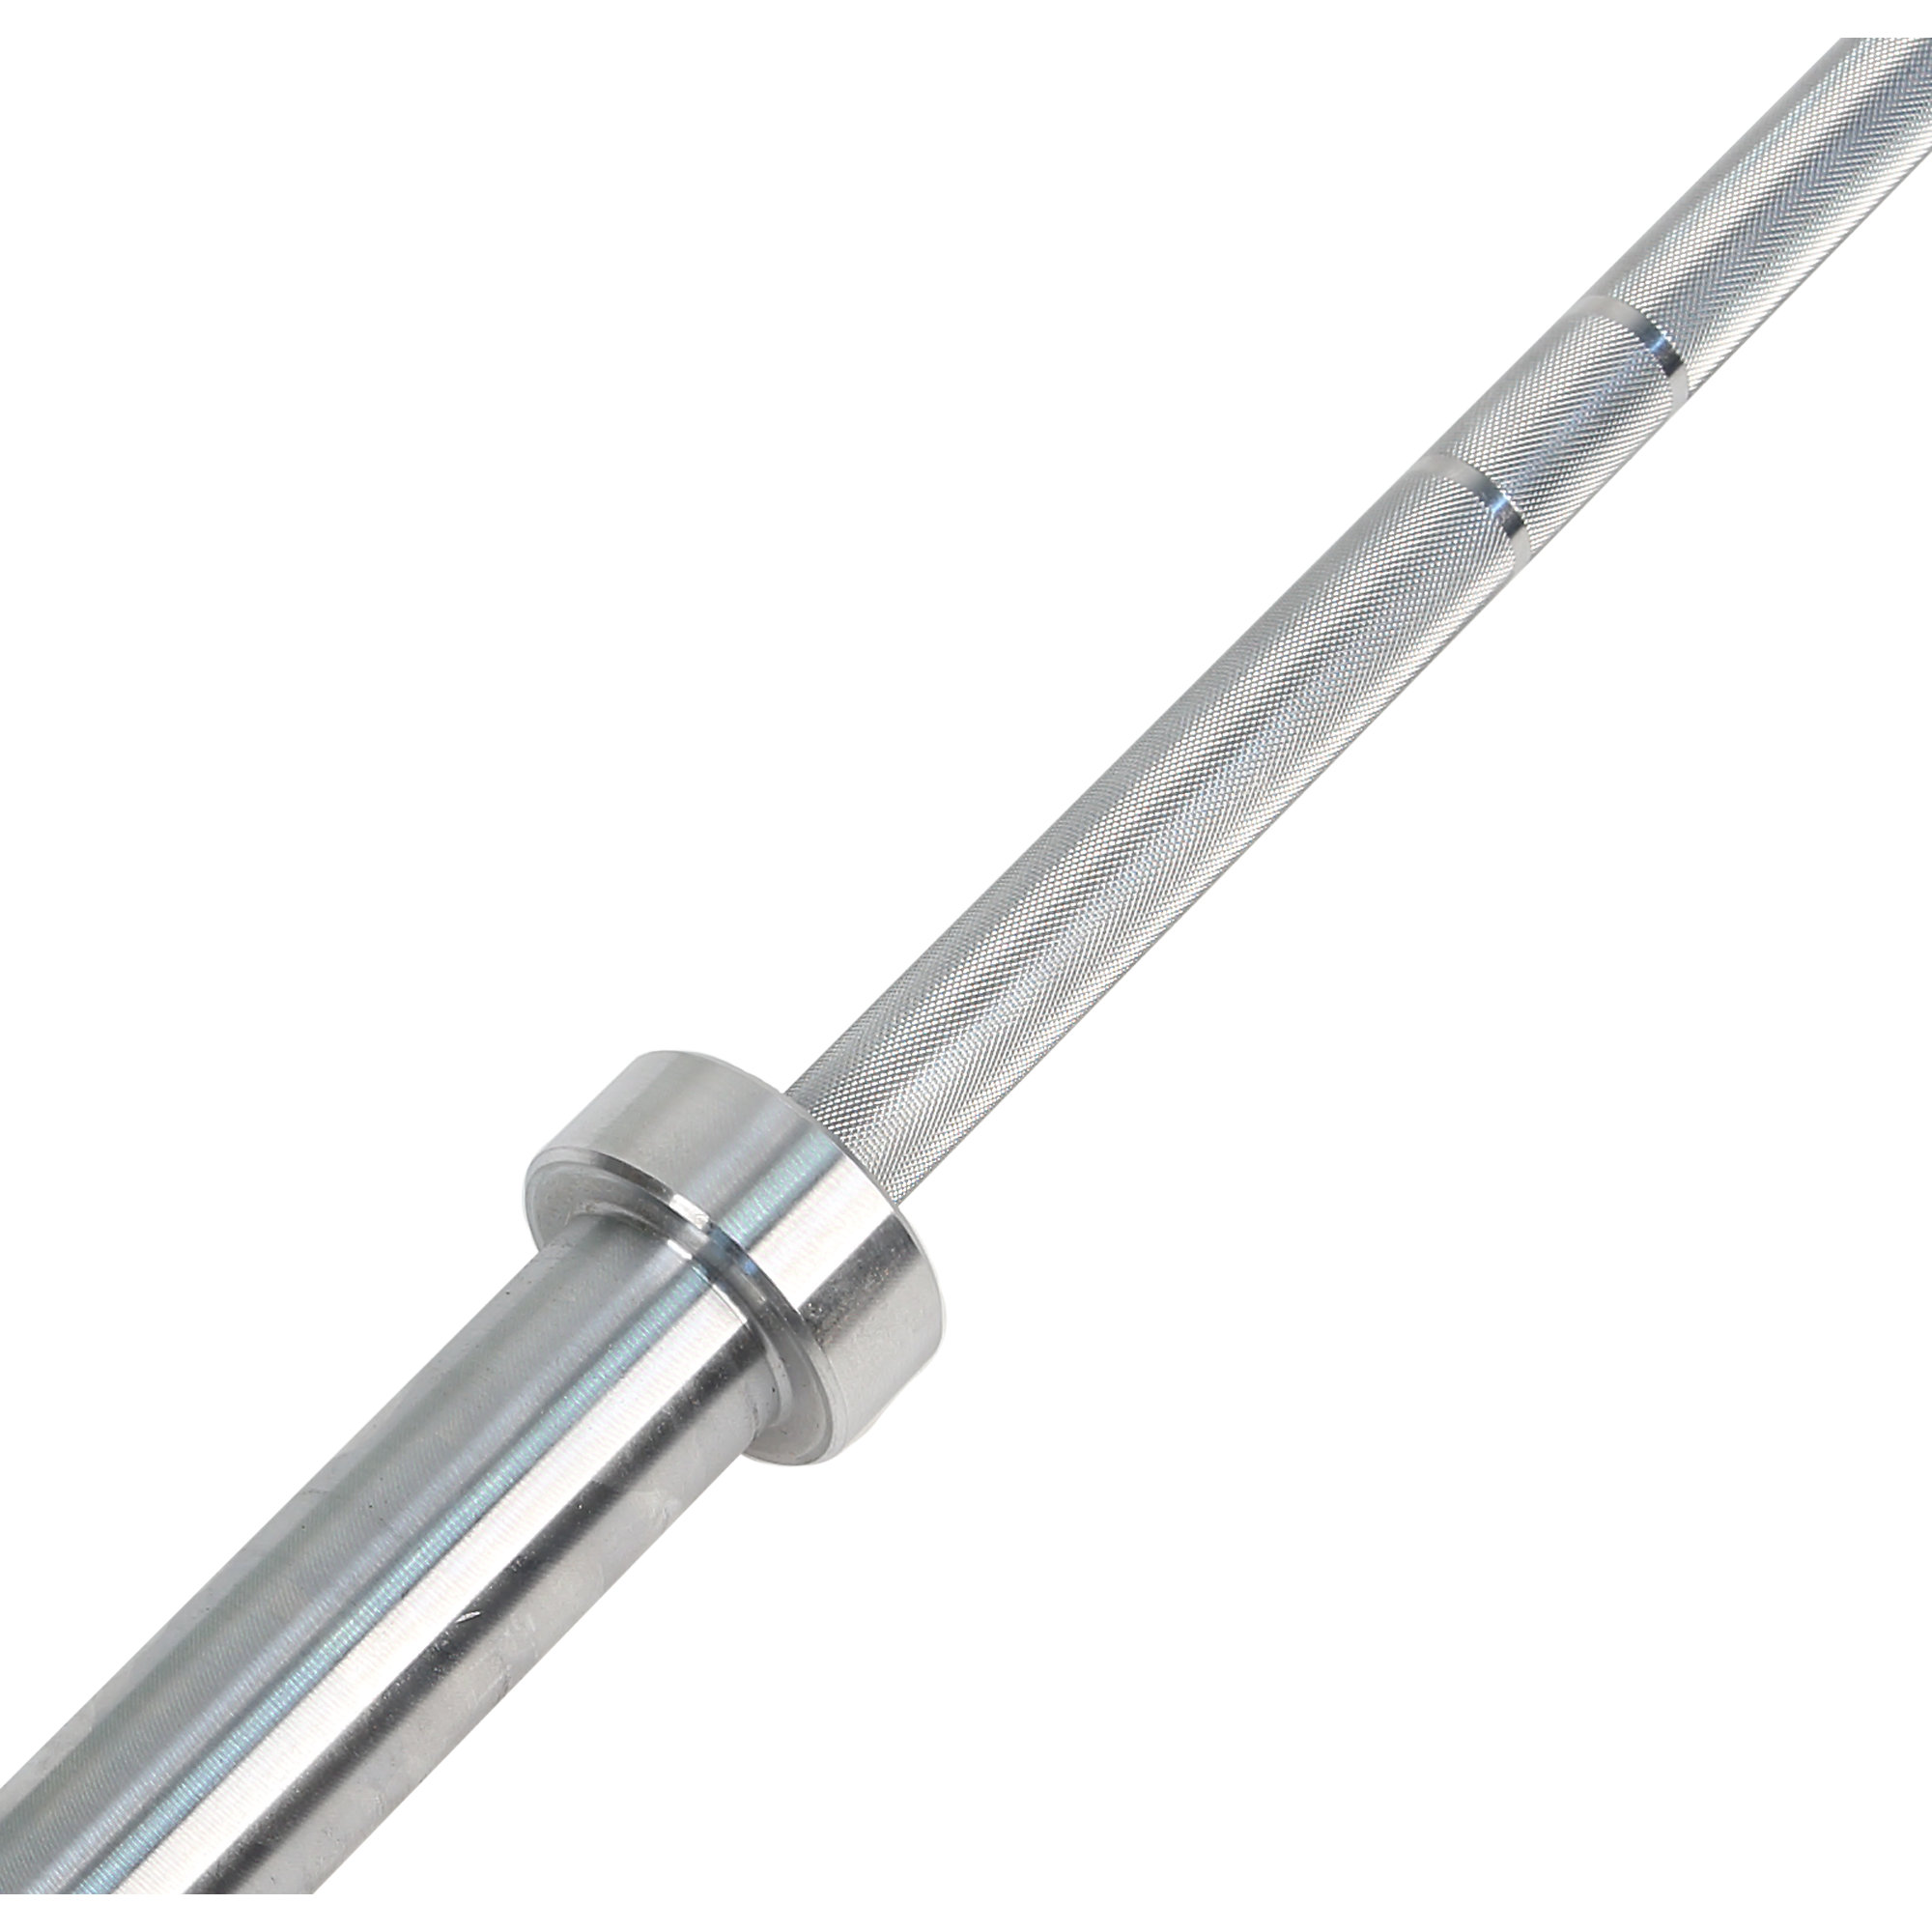 The Sportsmith Olympic Barbell – 20Kg